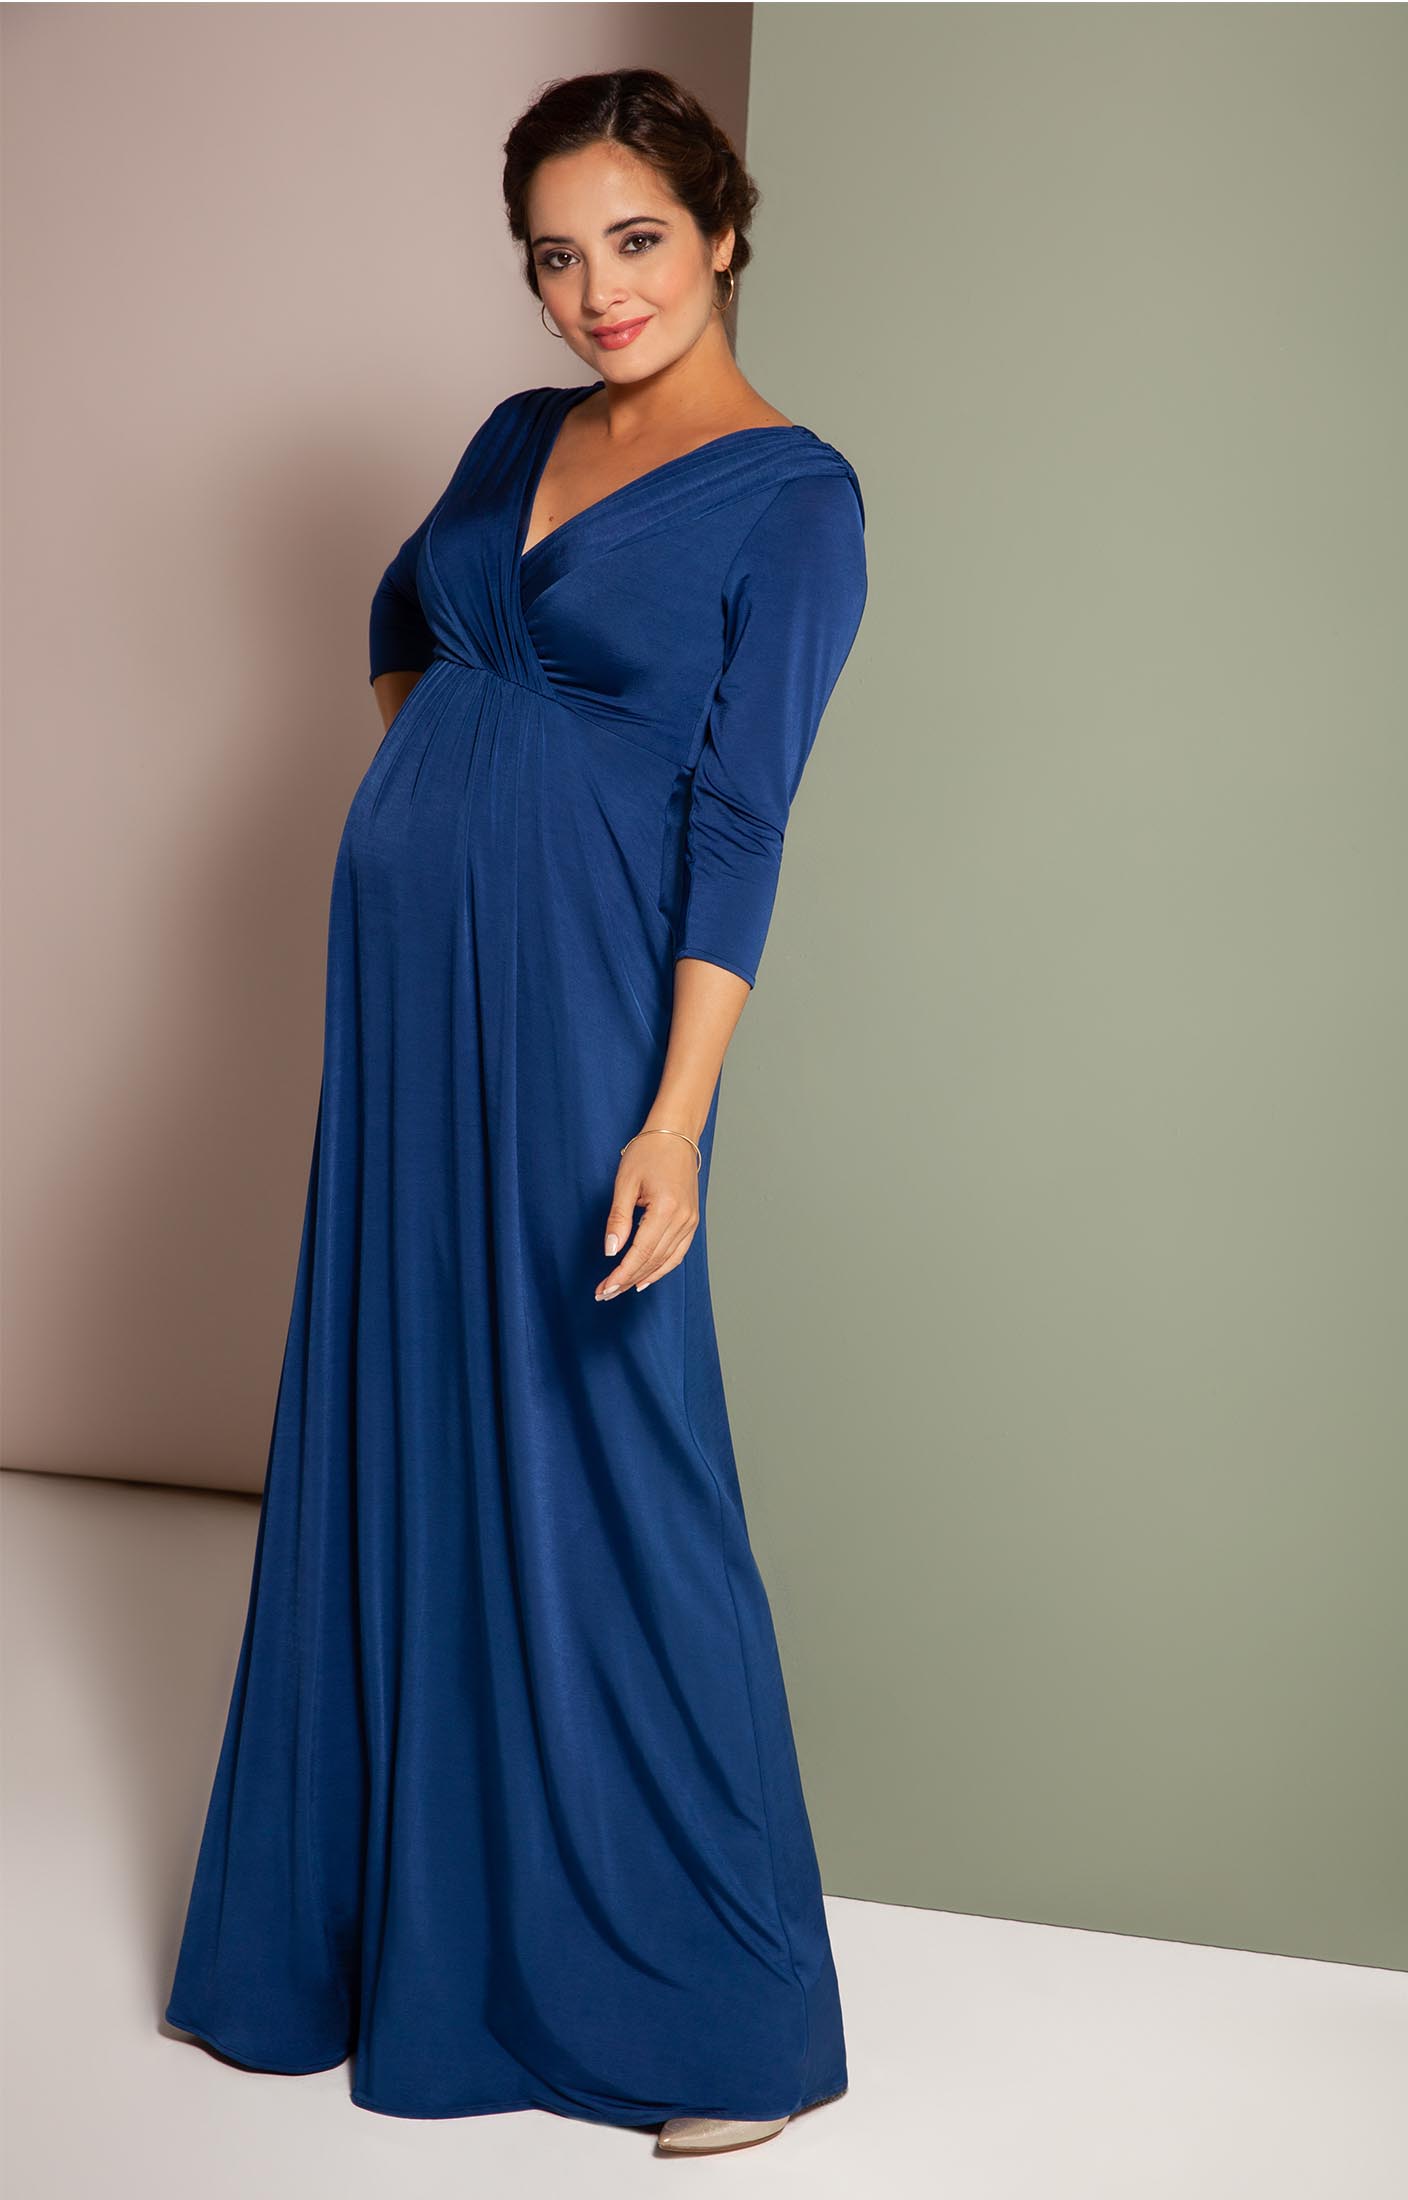 Willow Maternity Gown Imperial Blue 